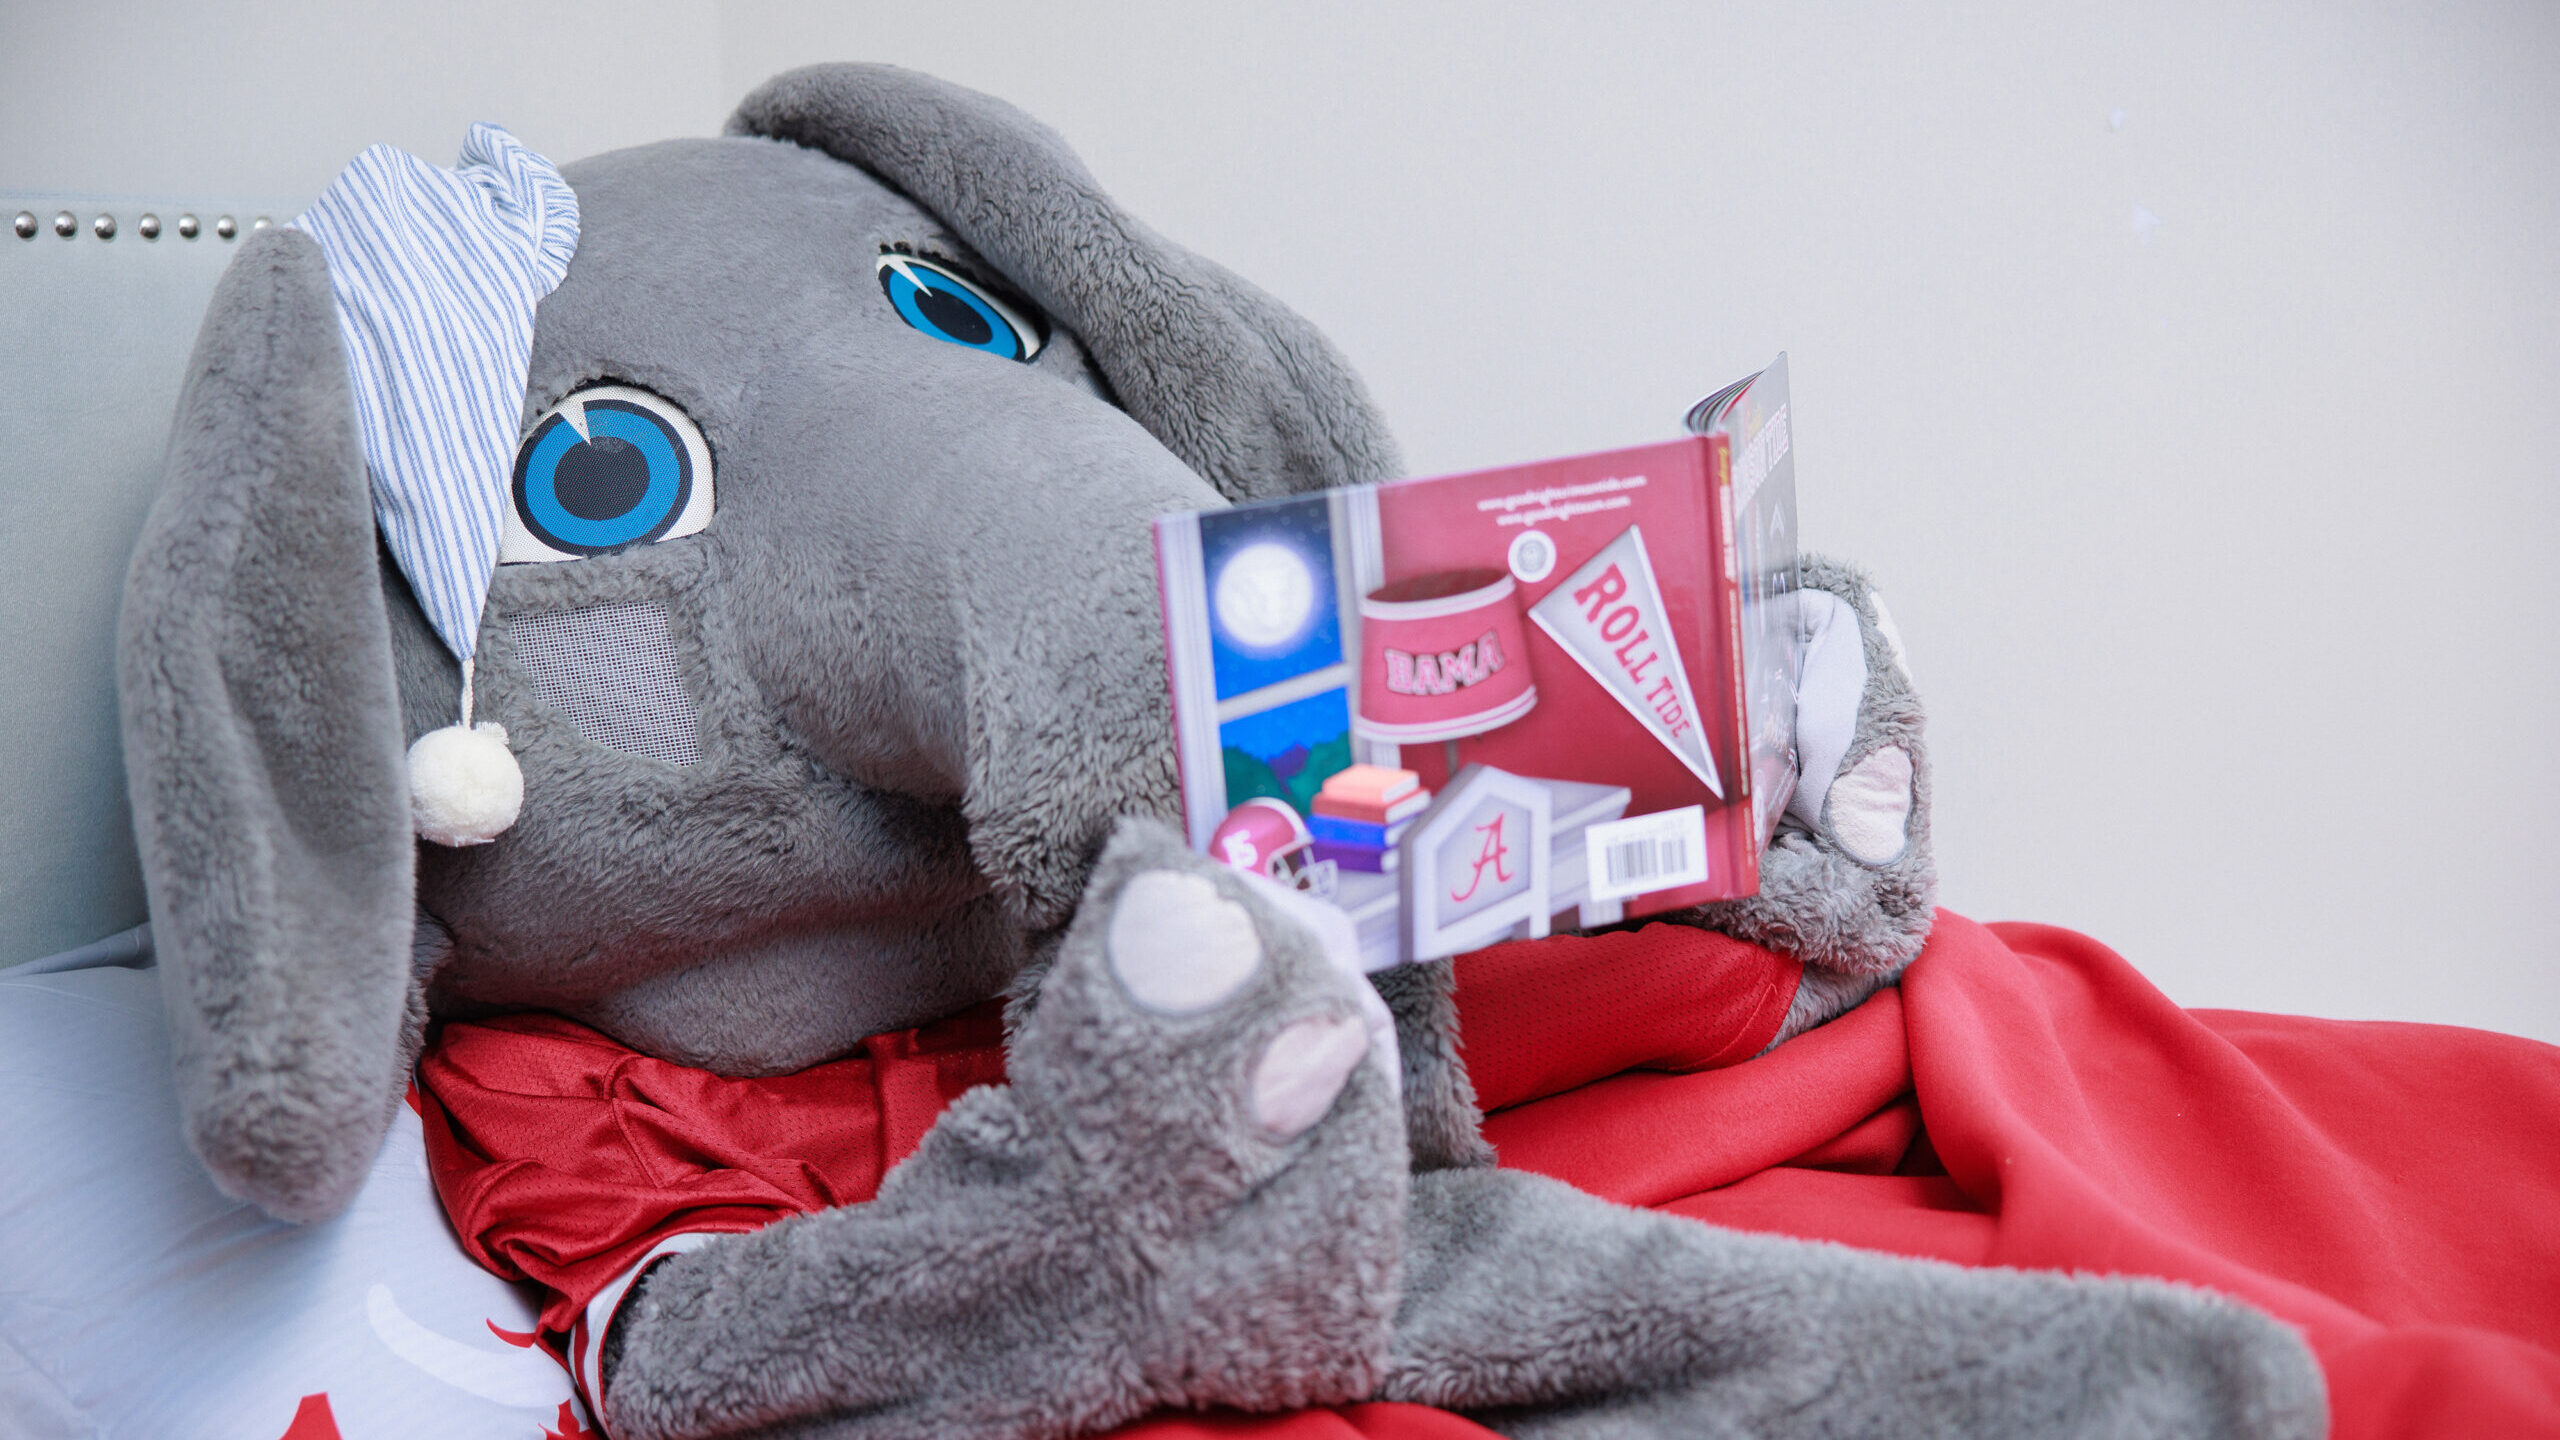 Big Al laying in bed with a sleep cap and a UA catalogue.